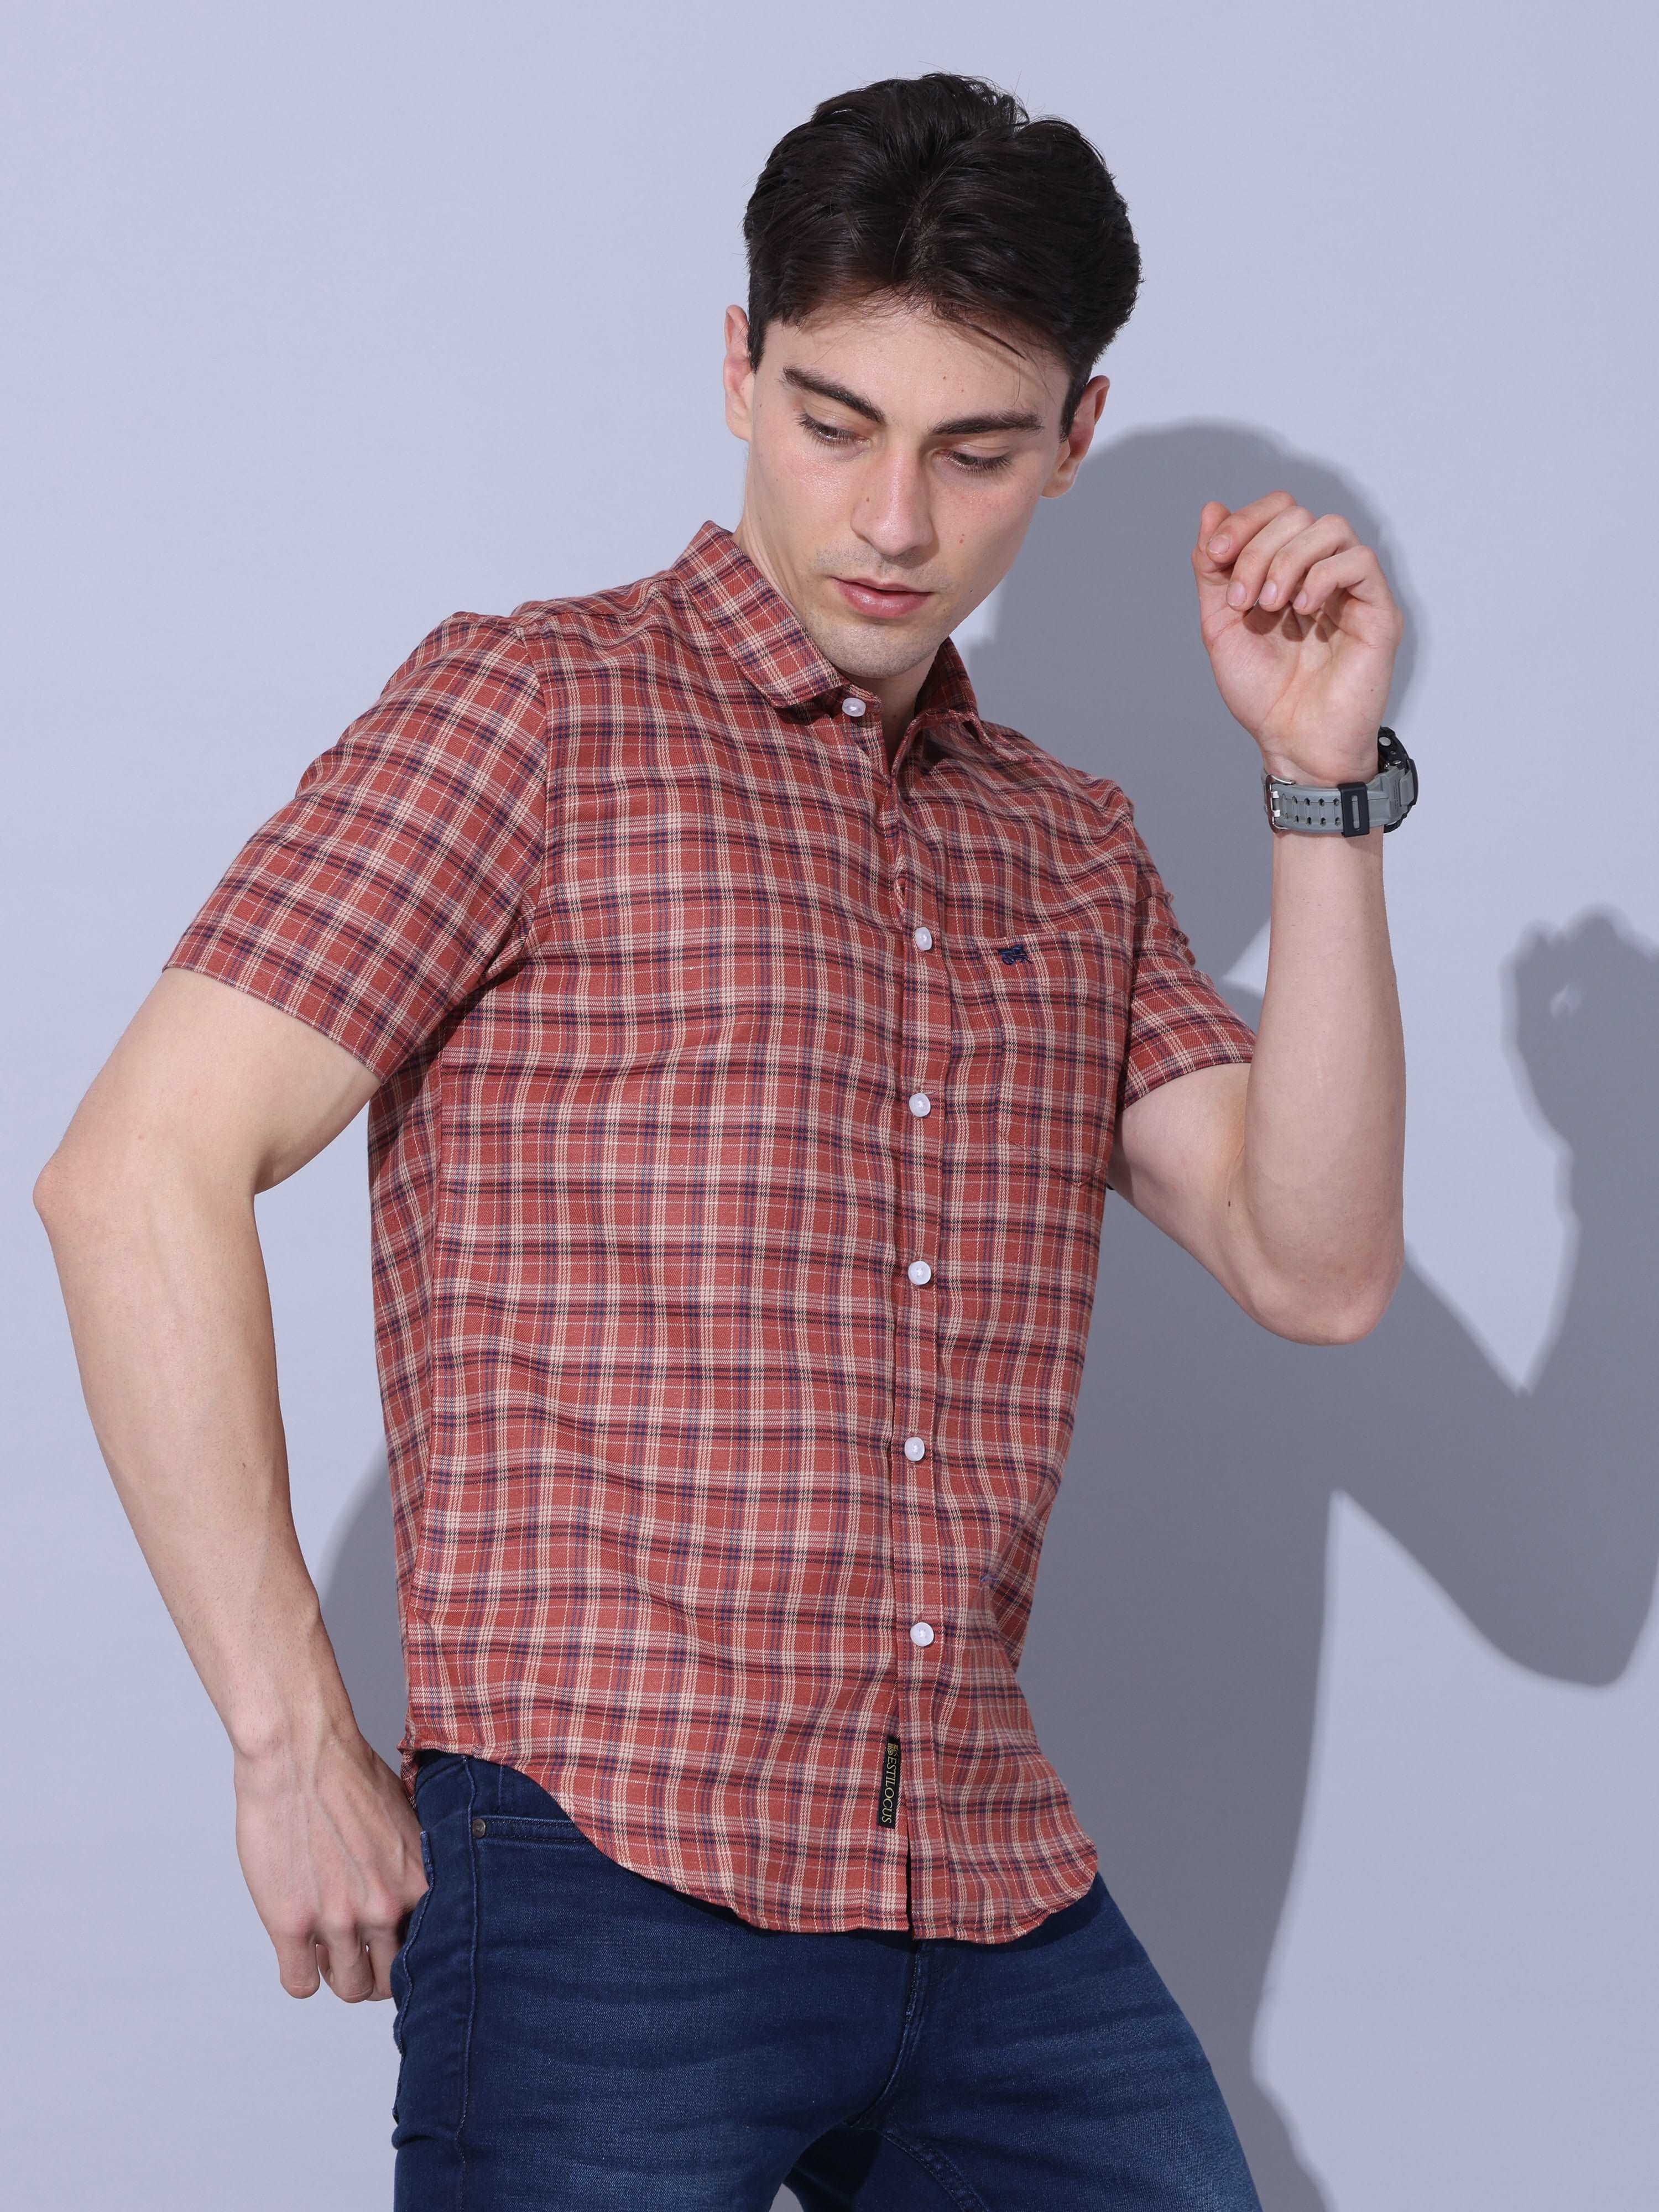 Bricks Check Casual Half Sleeve Shirt shop online at Estilocus. • Half-sleeve check shirt • Cut and sew placket • Regular collar • Single pocket with logo embroidery • Curved hemline • Finest quality sewing • Machine wash care • Suitable to wear with all